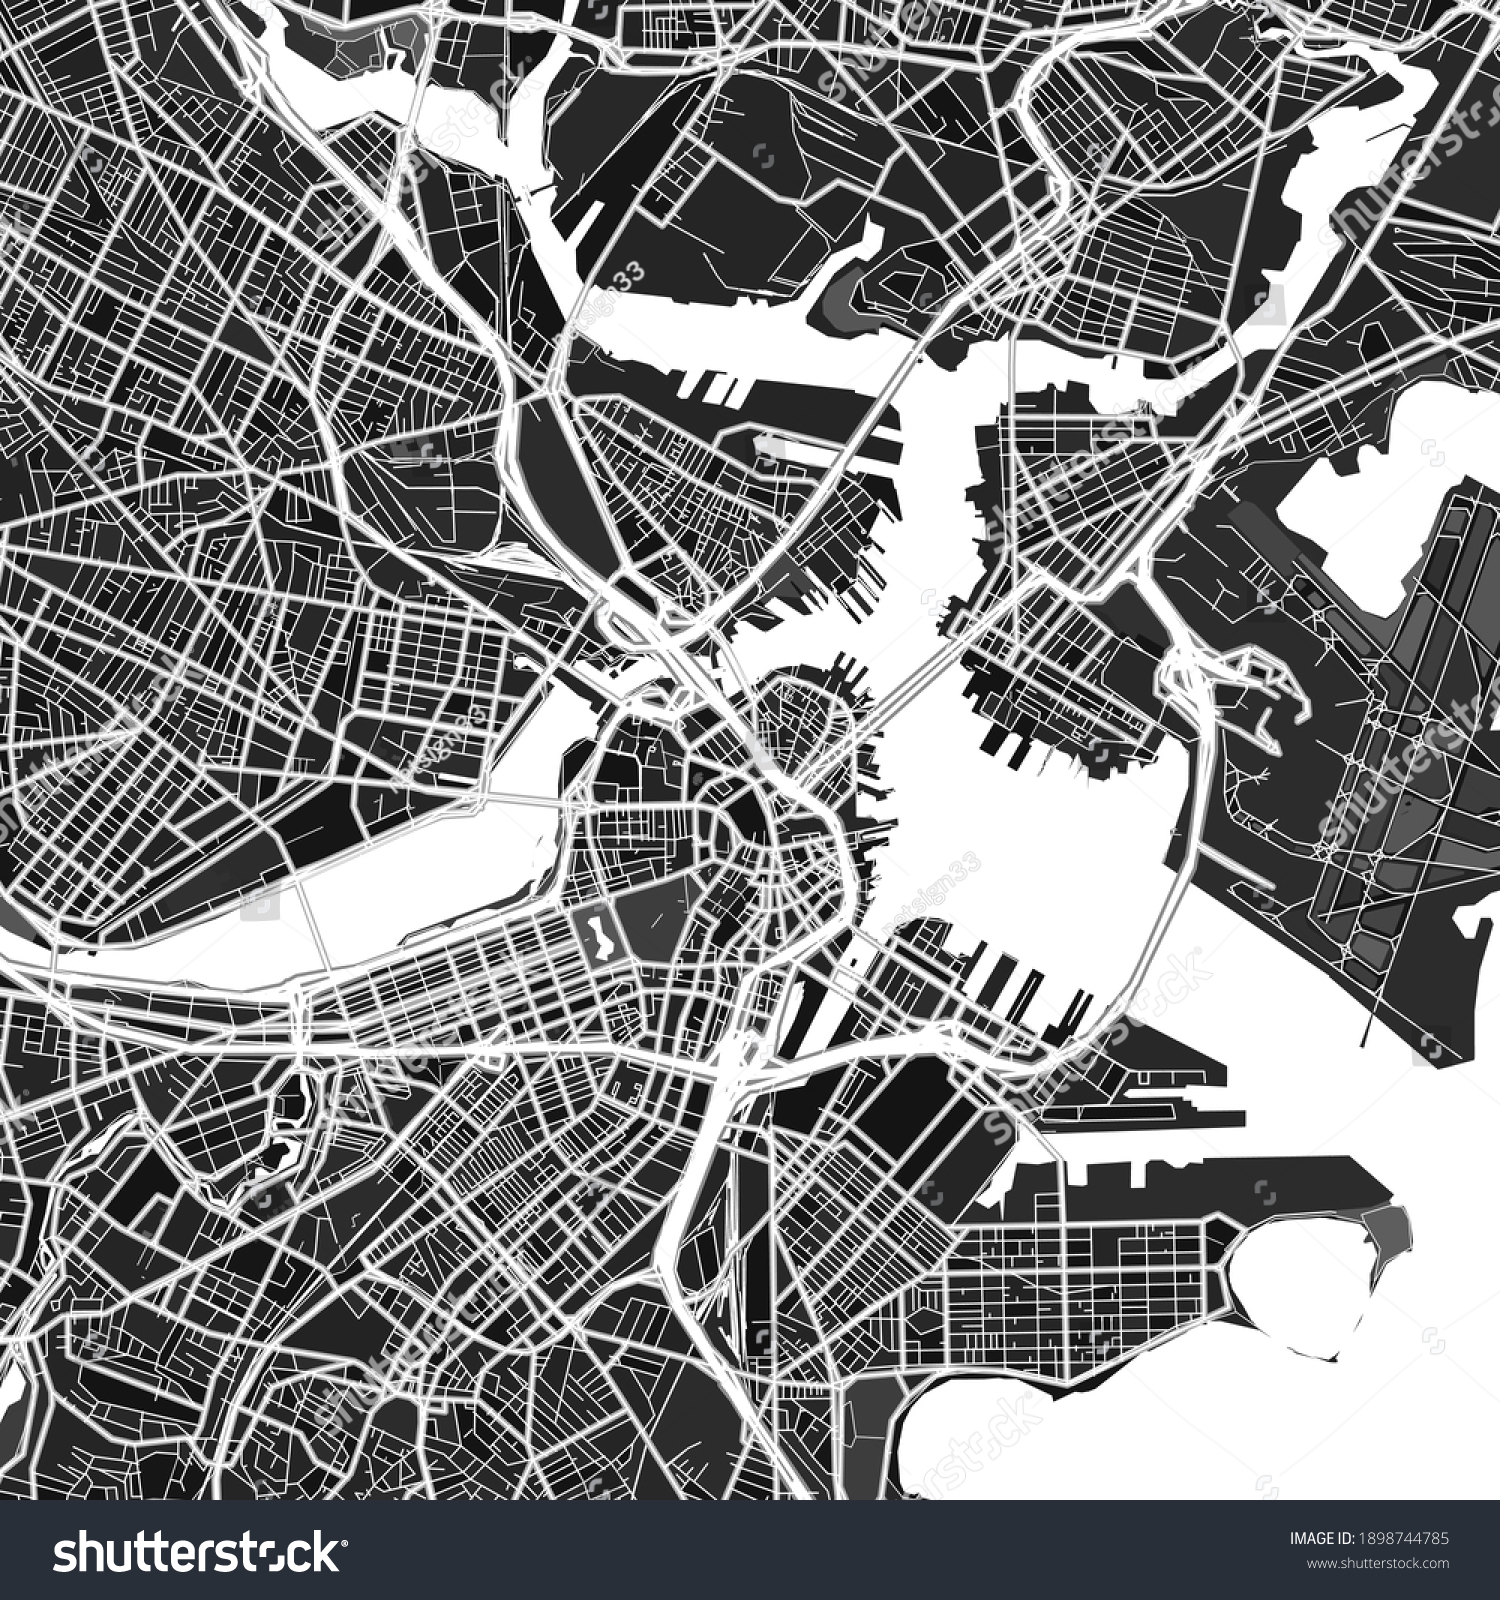 SVG of Dark vector art map of Boston, Massachusetts, UnitedStates with fine gray gradations for urban and rural areas. The different shades of gray in the Boston  map do not follow any particular pattern. svg